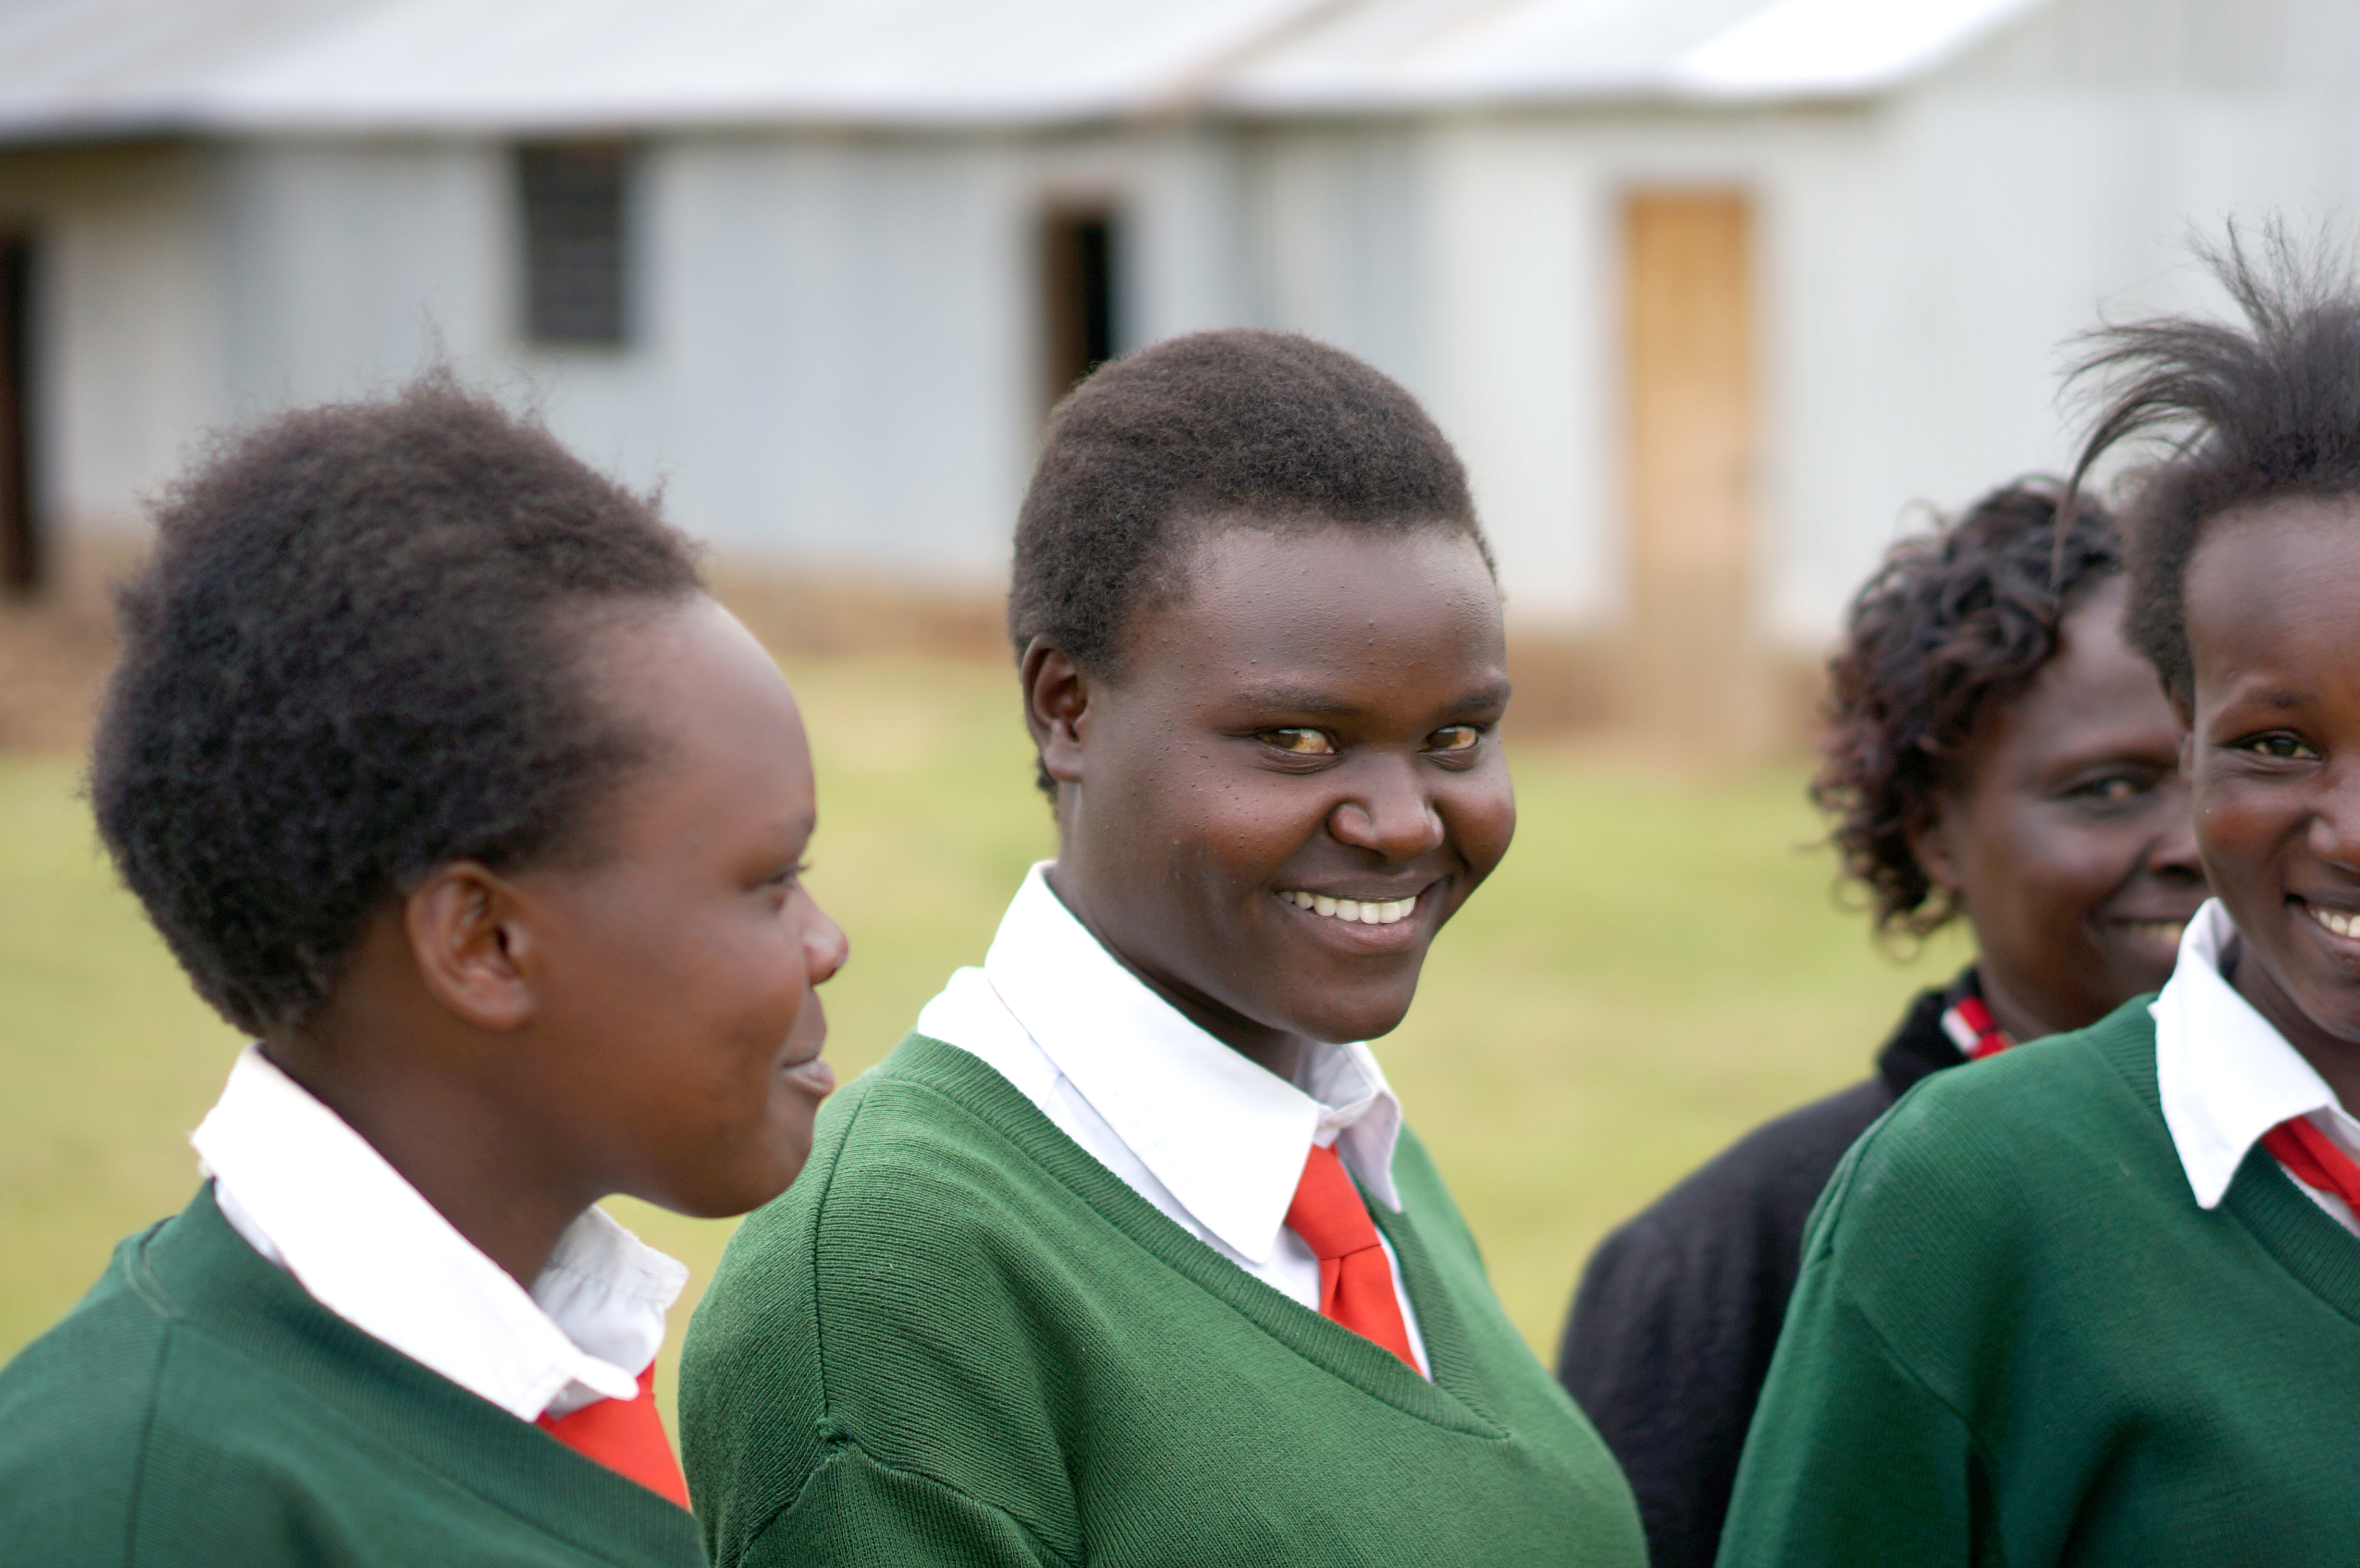 Girls happily attending school rather than fetching water!